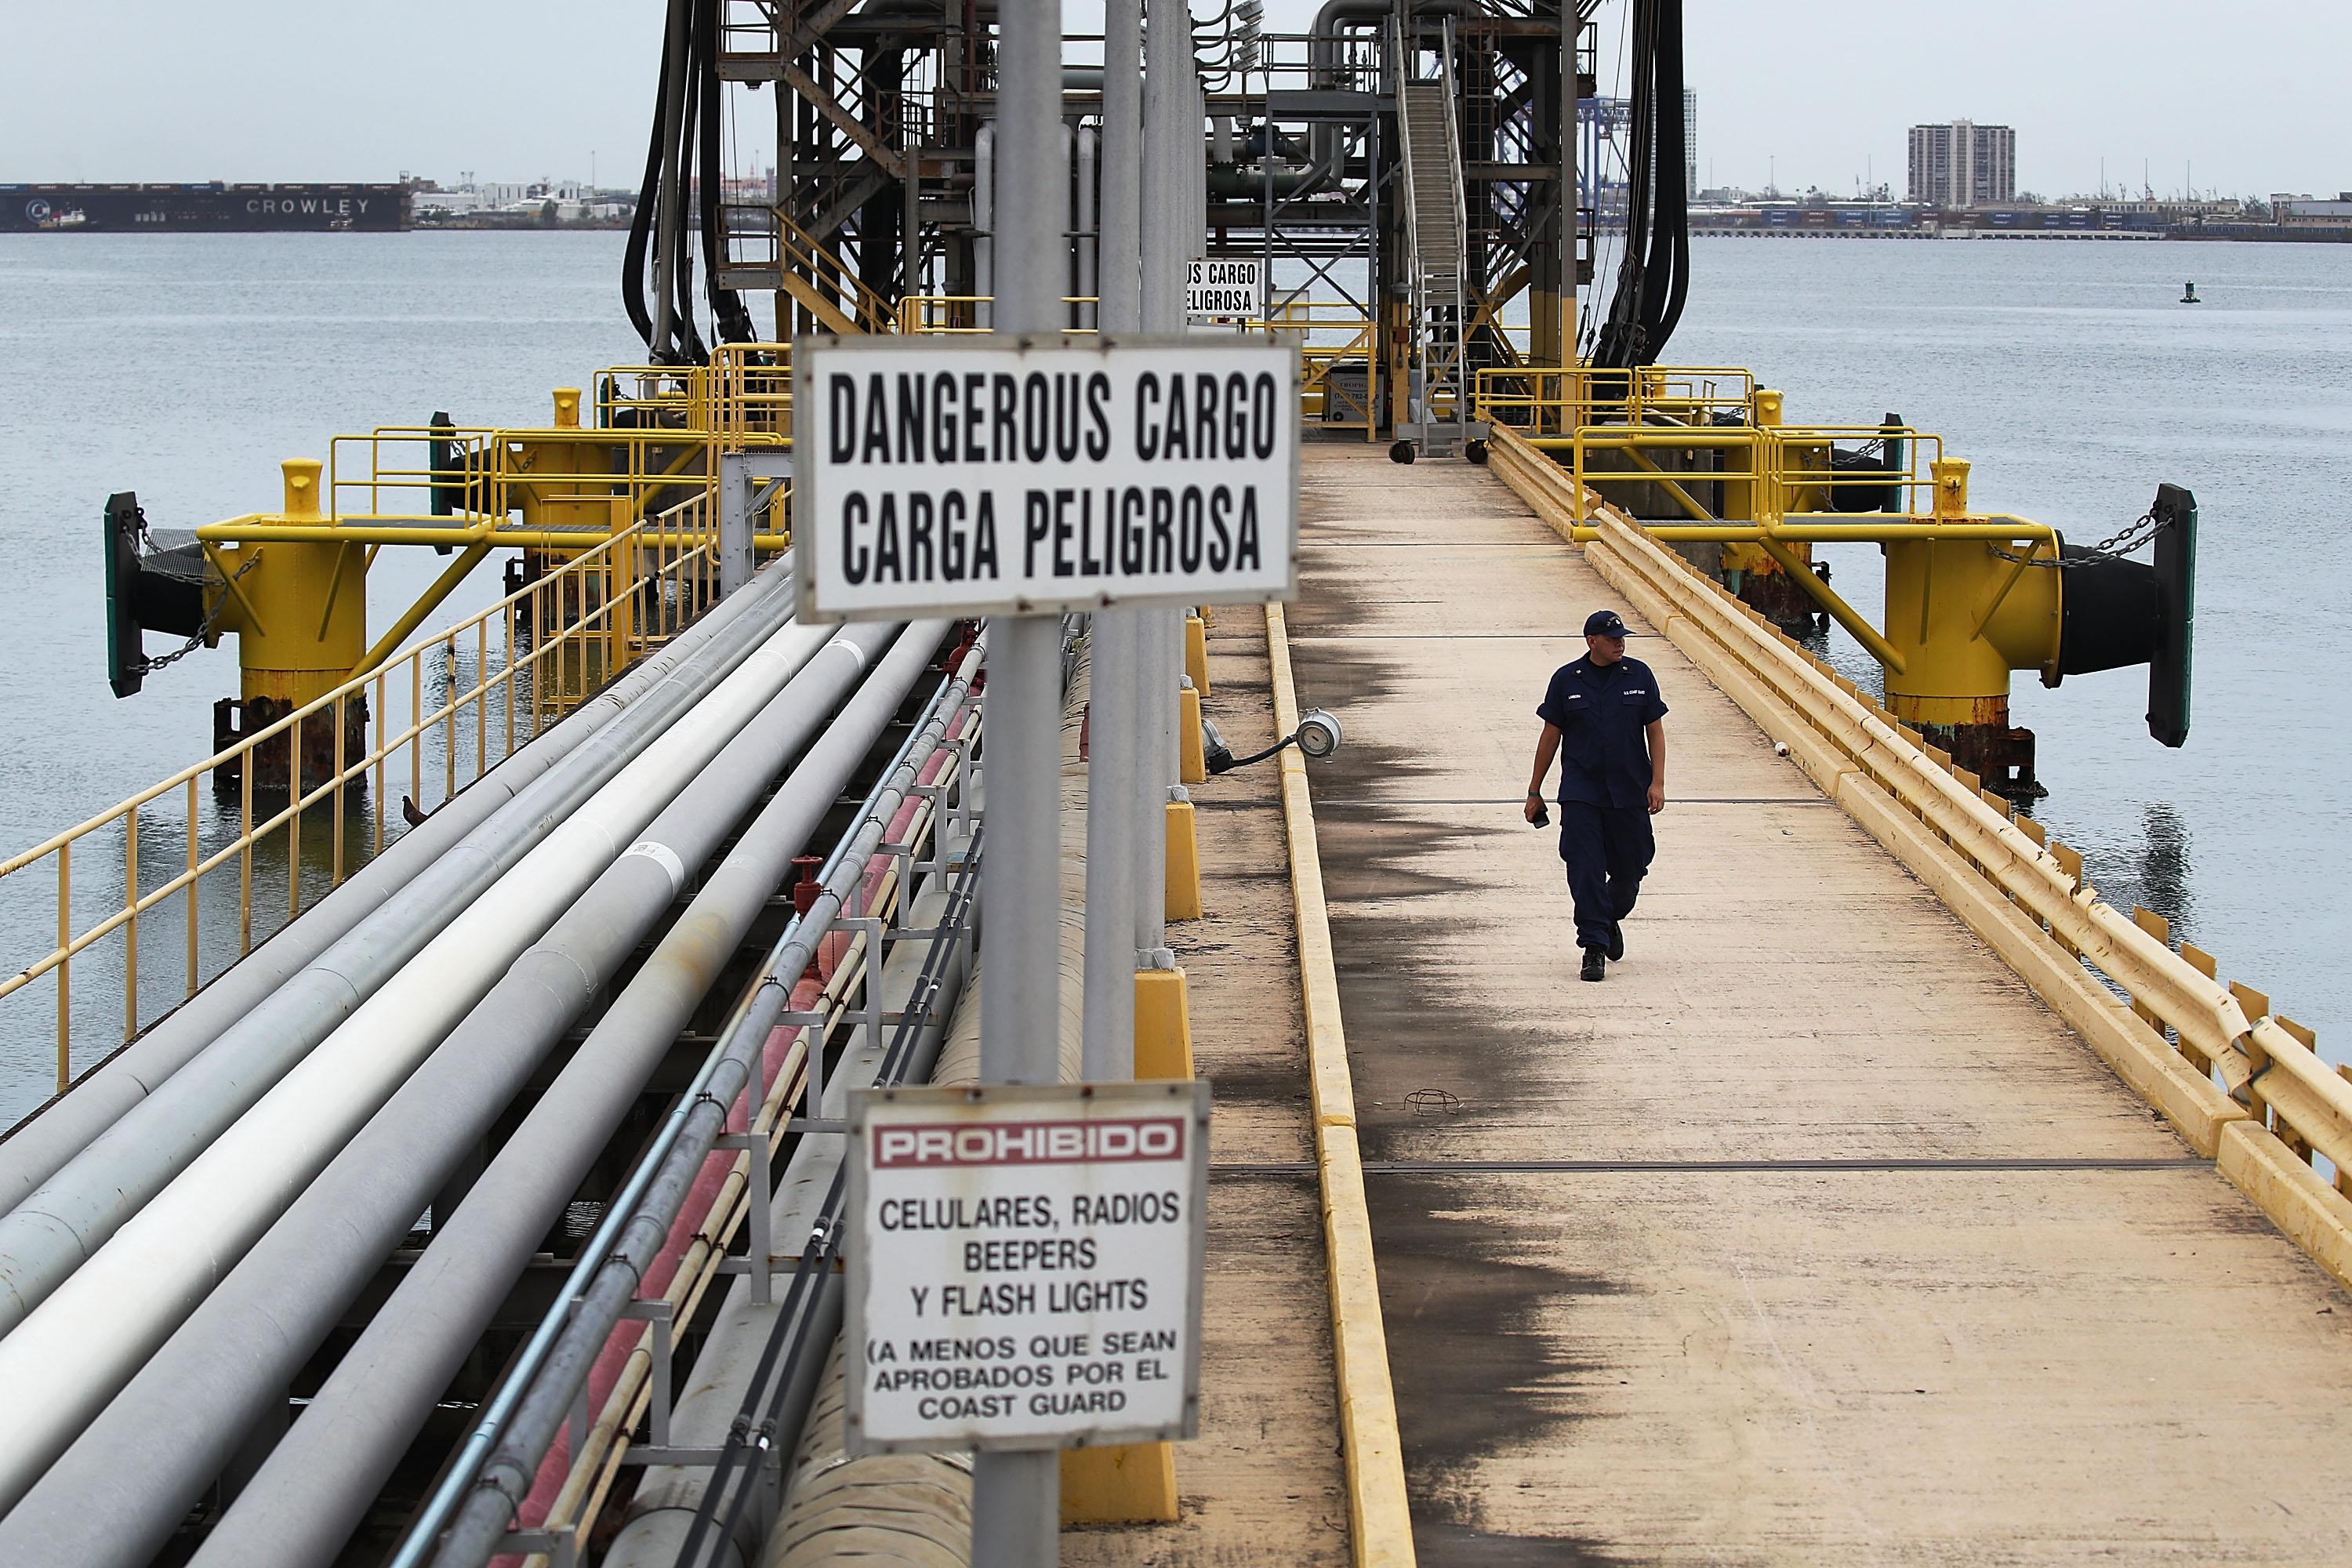 A man in a Coast Guard uniform walks down a long cement dock with oil pipes along the side. 